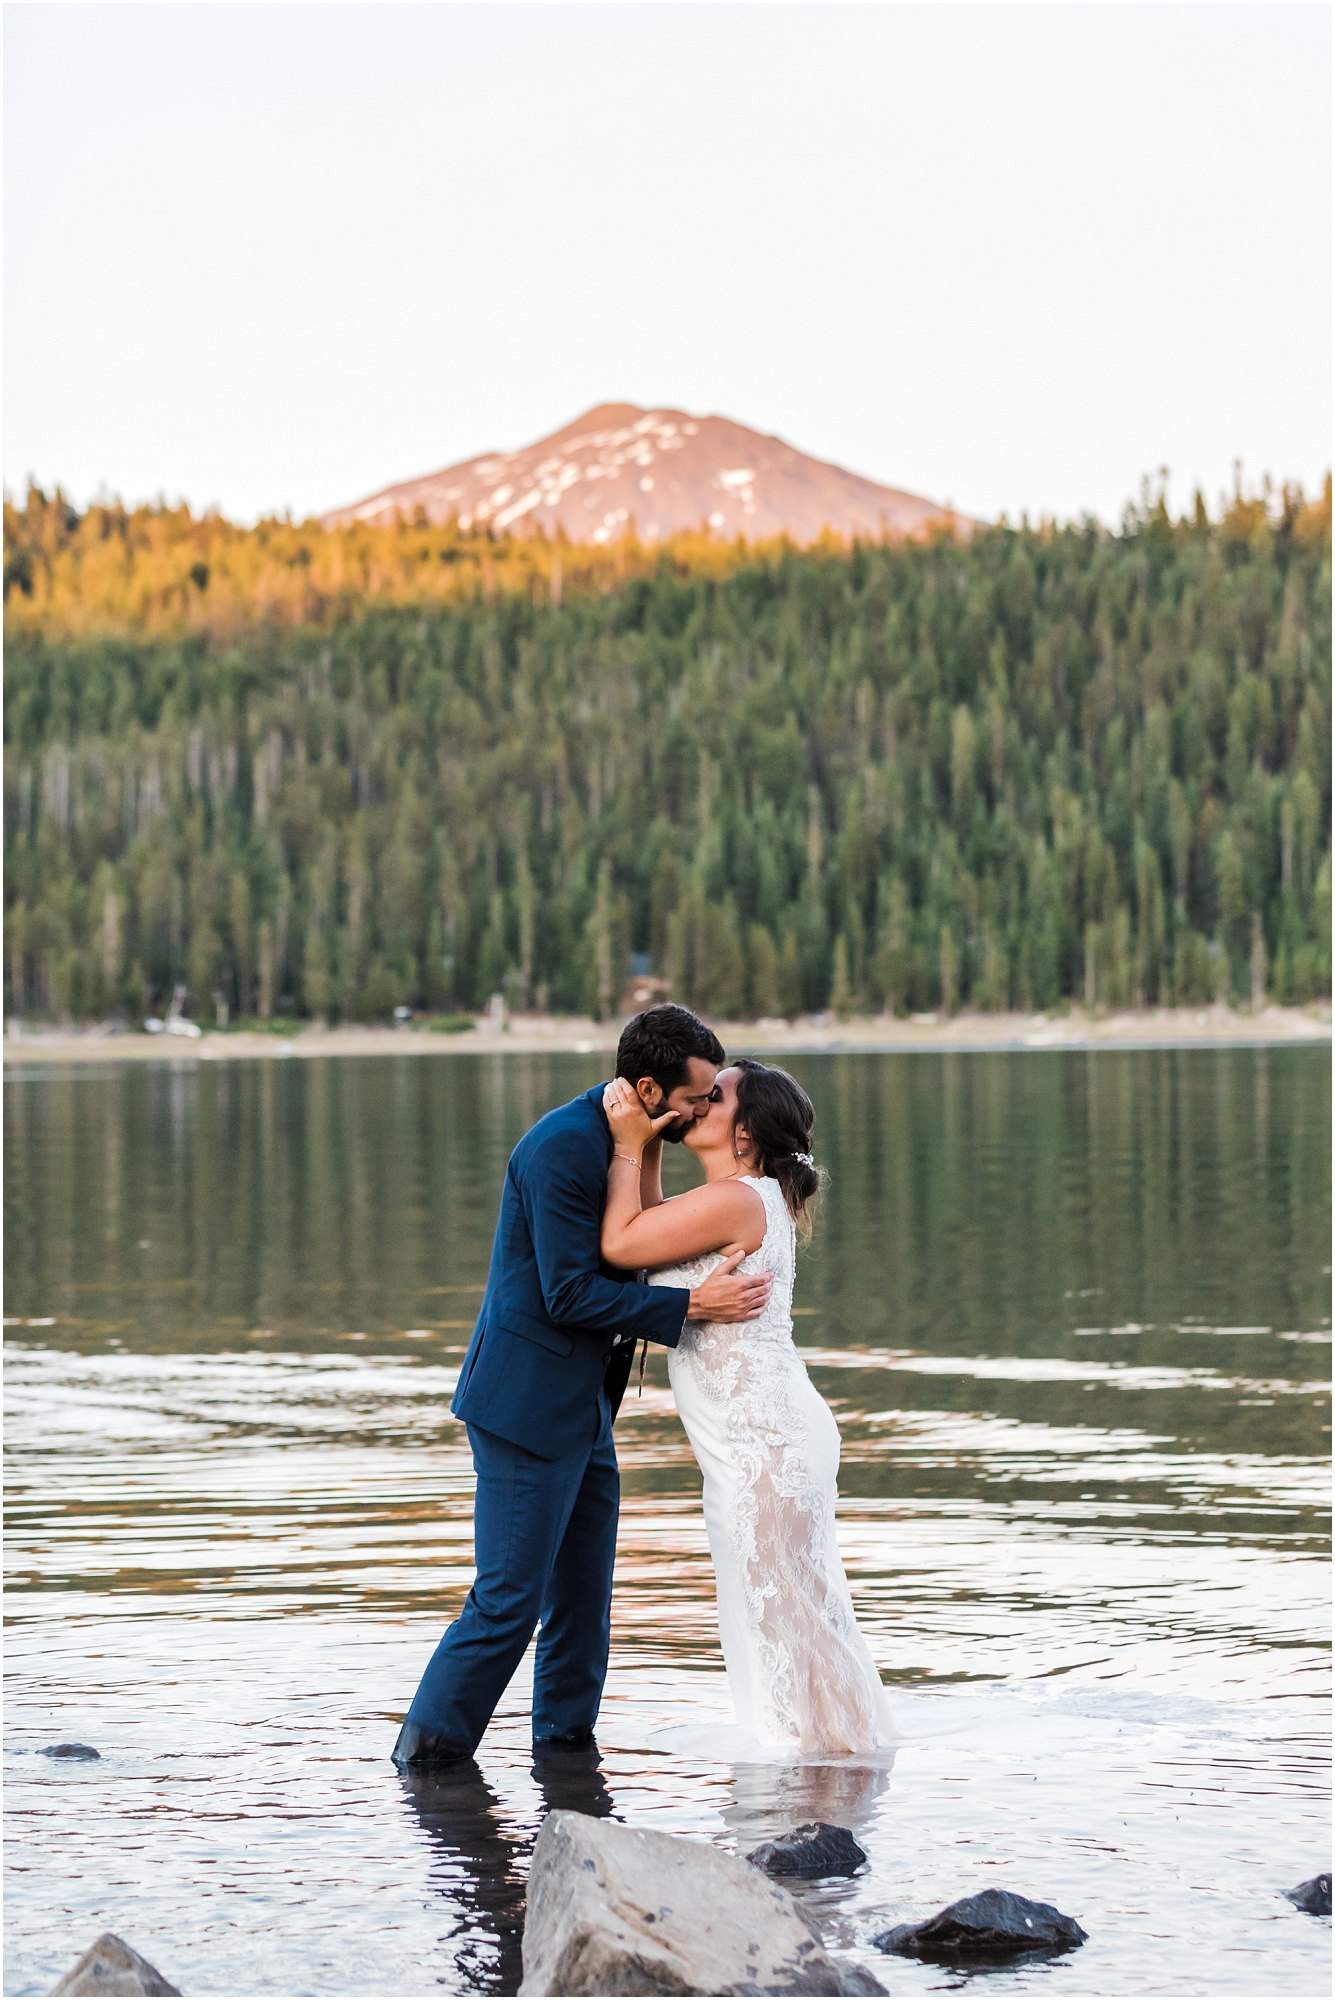 A bride in her white lace dress kisses her groom while standing in the water at Elk Lake Resort with Mt. Bachelor in alpenglow behind them after their Elk Lake wedding, a perfect place to elope in Bend. | Erica Swantek Photography